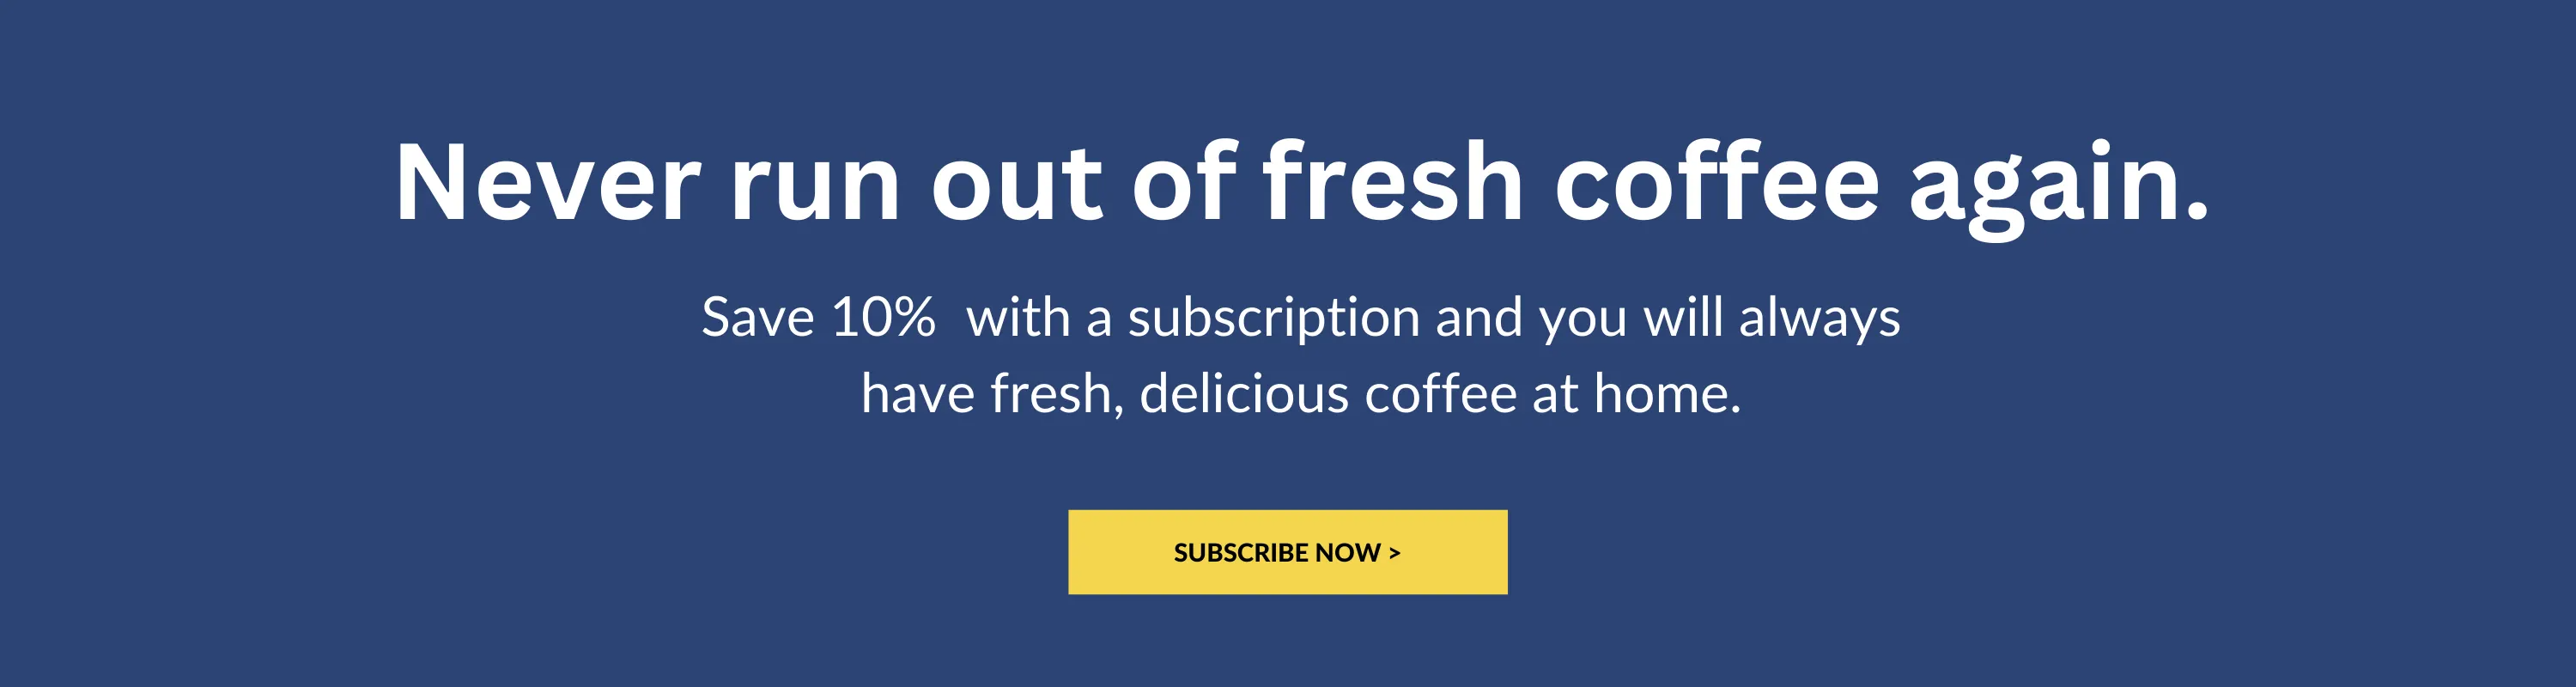 Save 10%  with a subscription